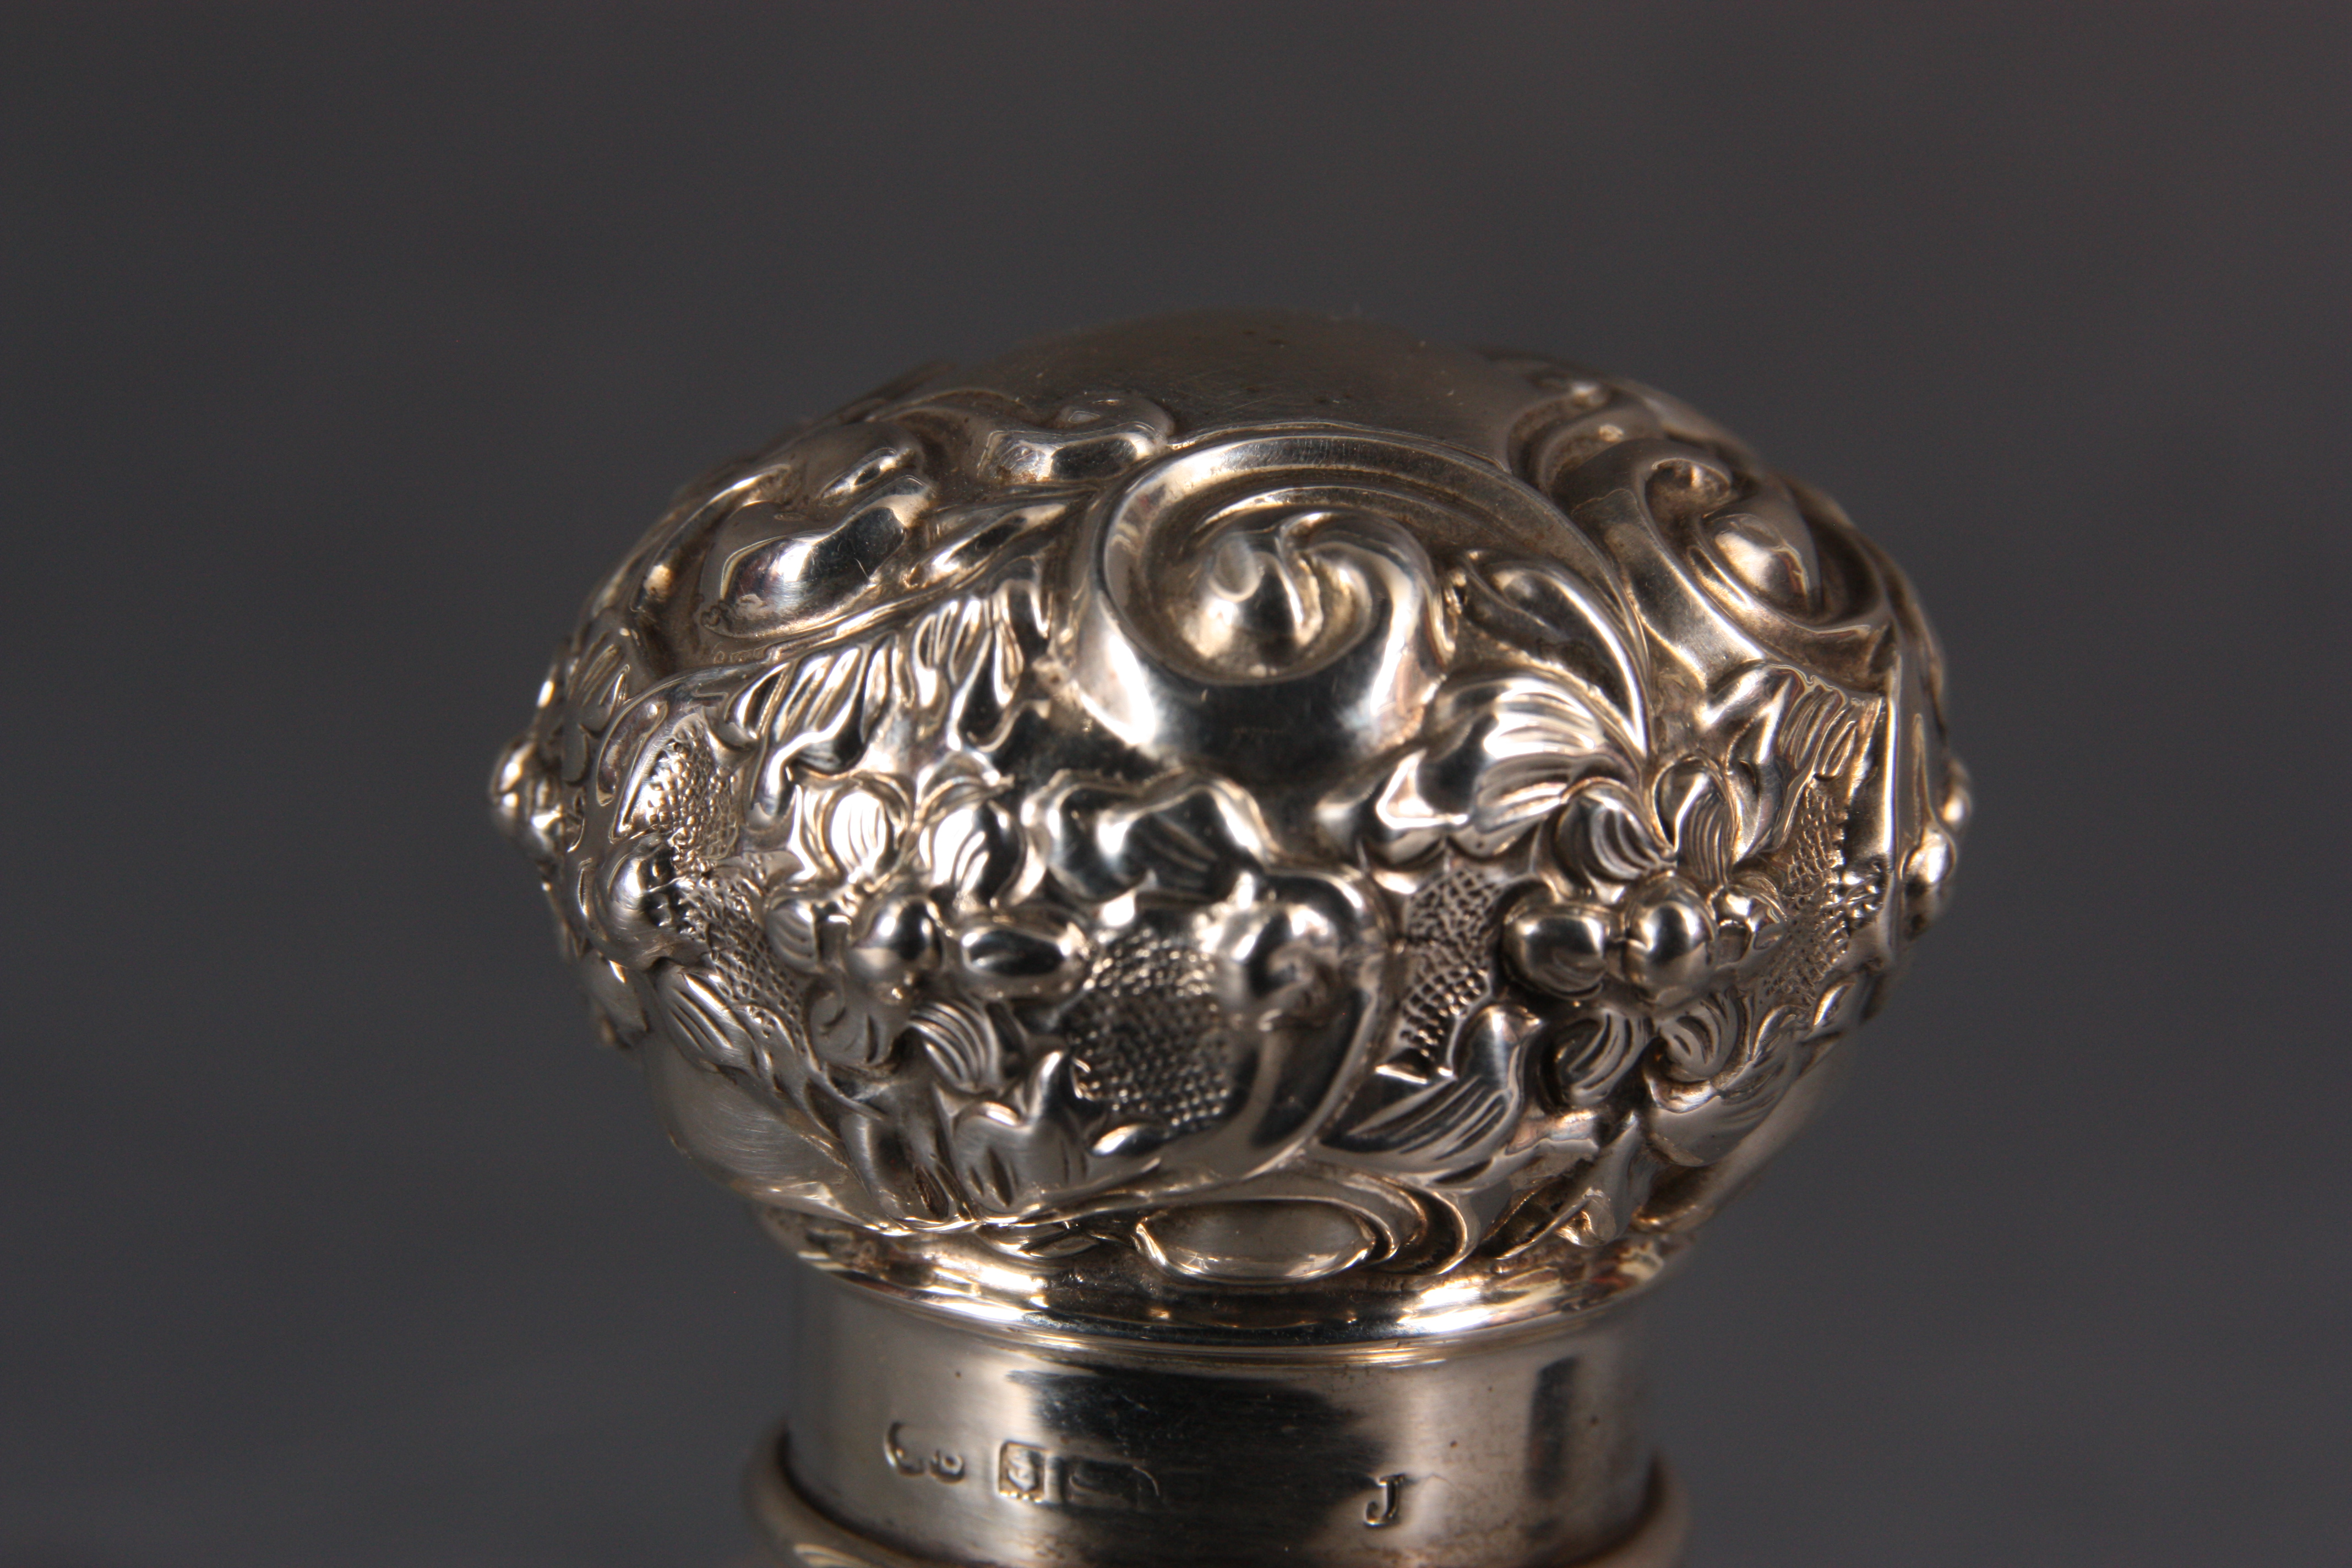 AN EDWARD VII BULBOUS HOBNAIL CUT GLASS Edward TOILETWATER BOTTLE and STOPPER with Silver neck mount - Image 3 of 4